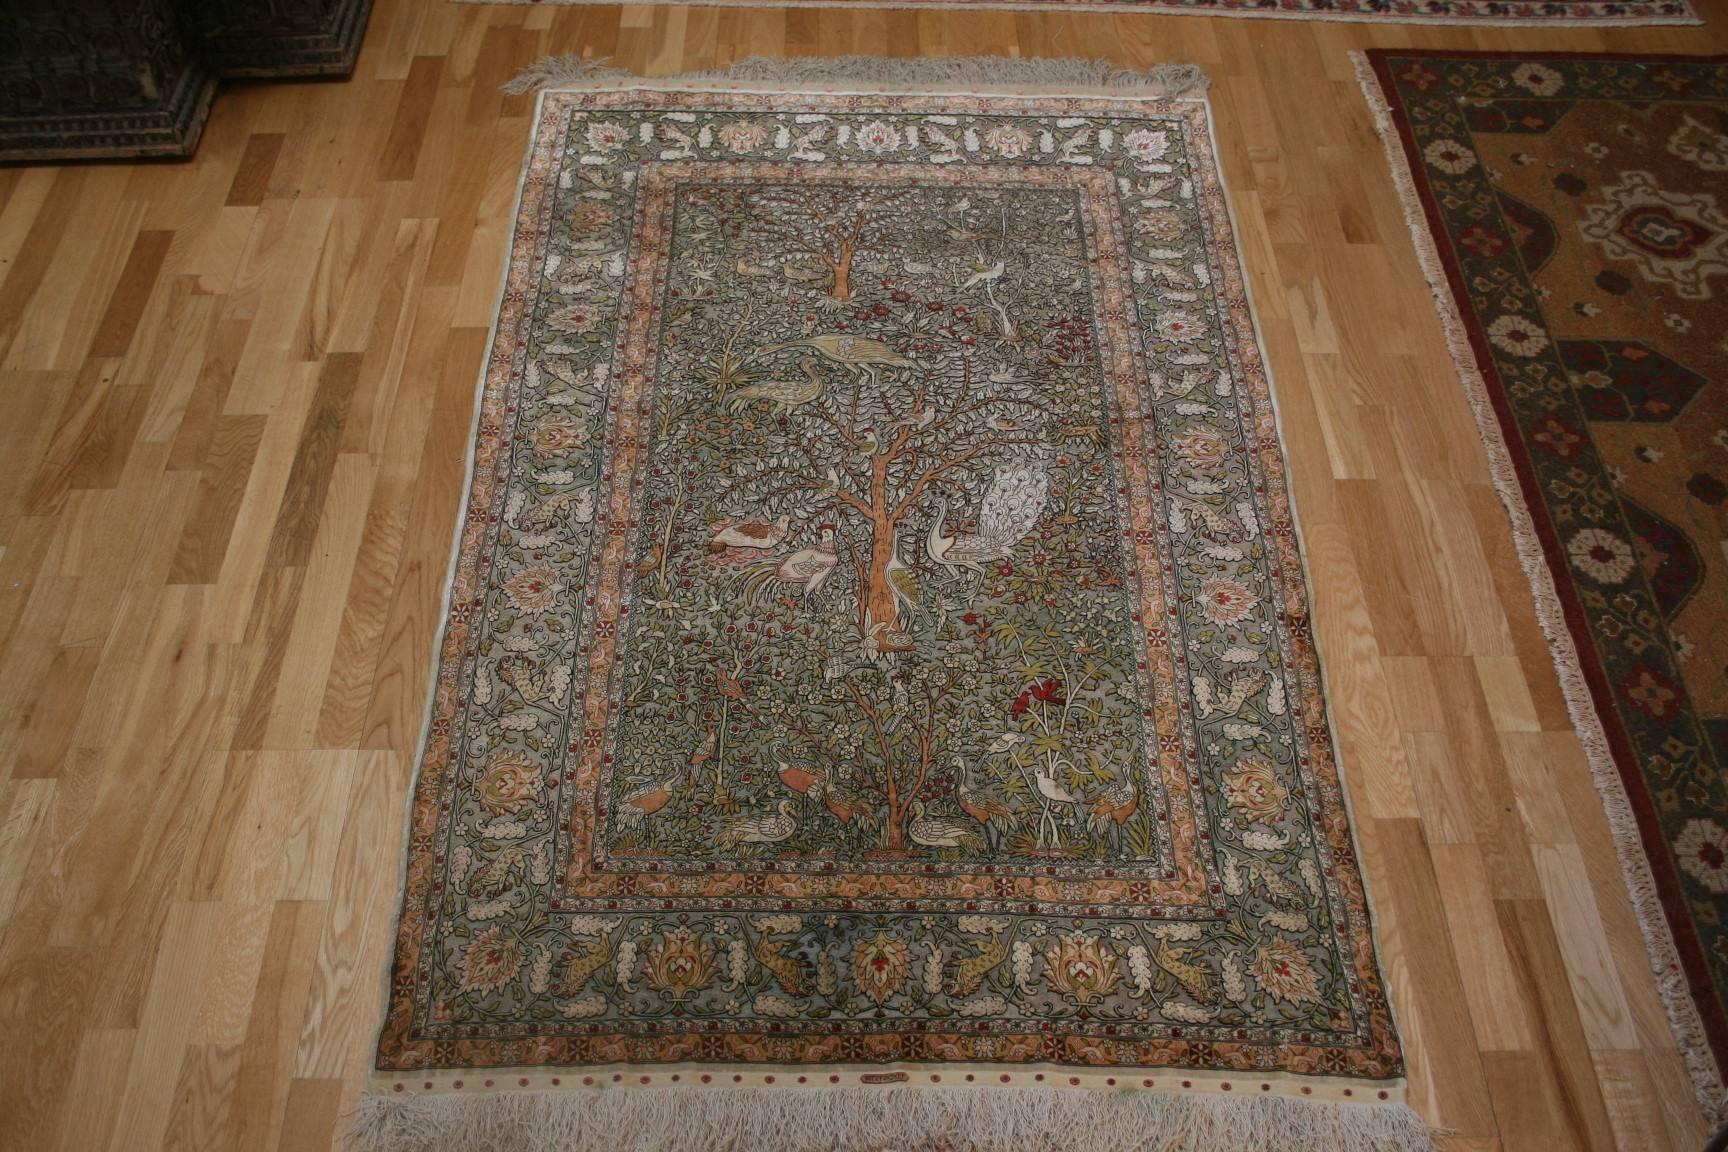 A vintage silk and metallic Turkish Hereke woven and signed by "Ozipek" workshops in Hereke. This design is a famous Mughal Indian 'Tree of Life with Birds'.  The original 16th-17th century piece is in a museum. The knot count per square